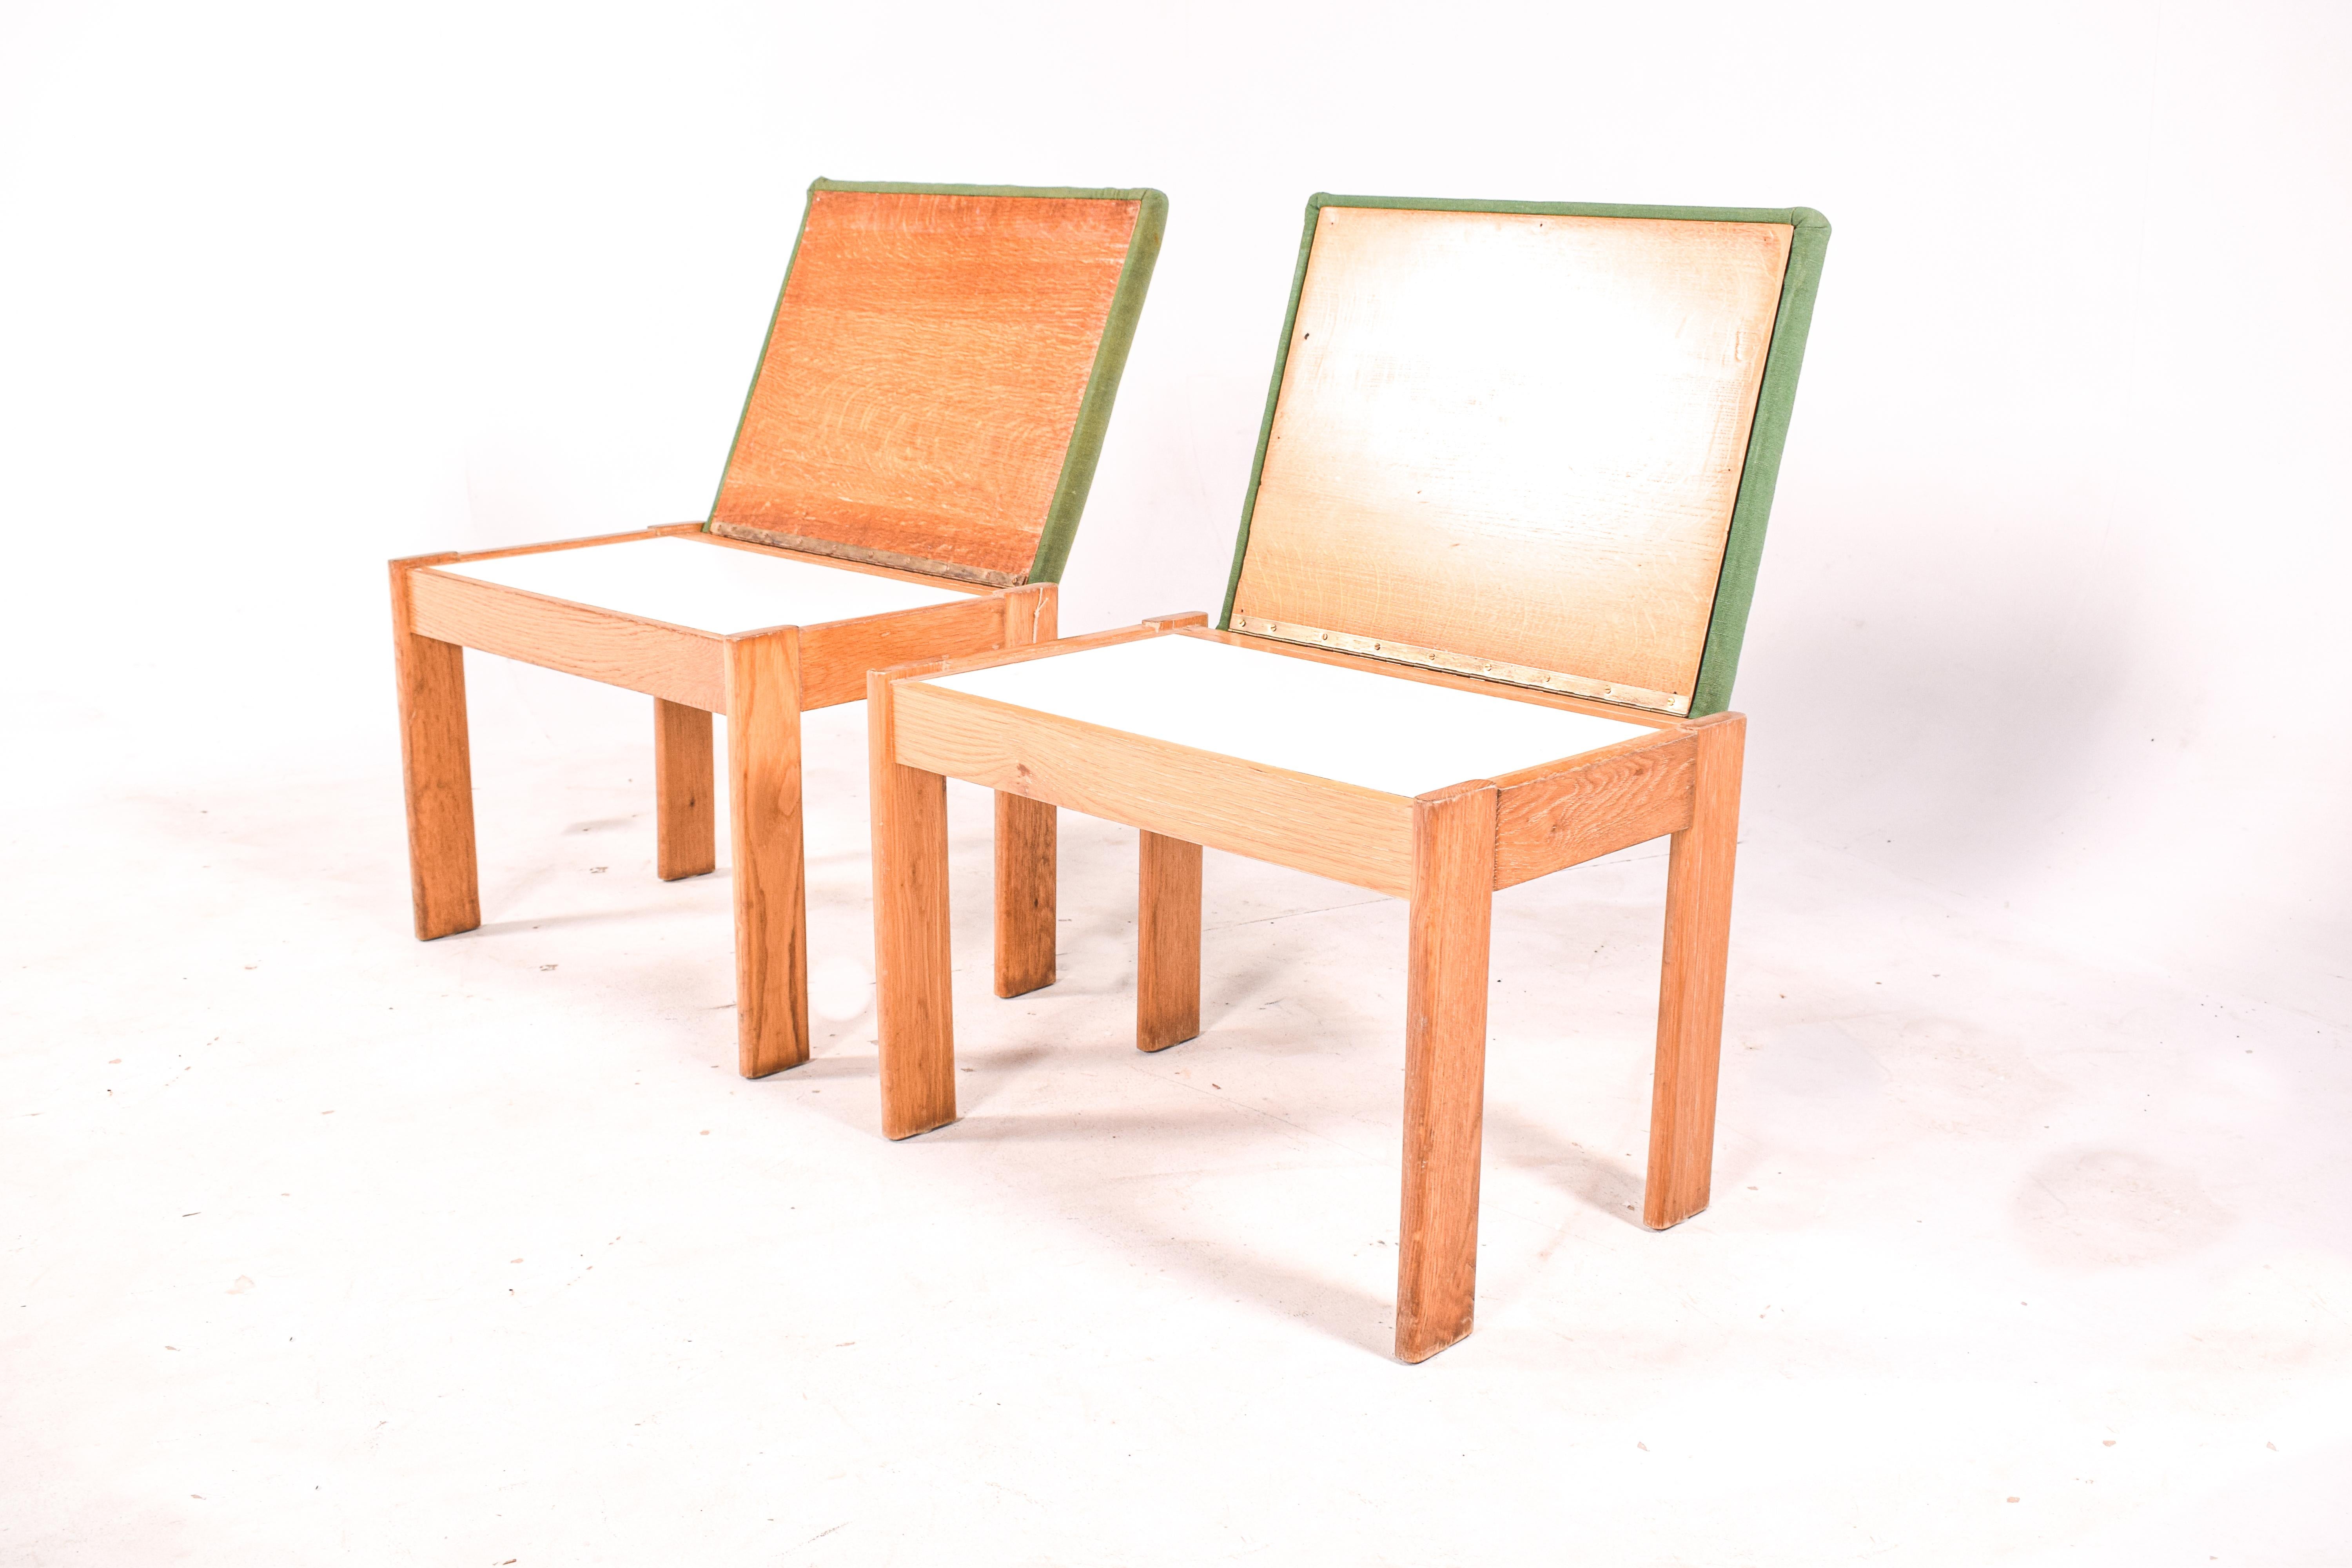 Fabric Pair of Portuguese Oak Benches/Side Tables, 1980s